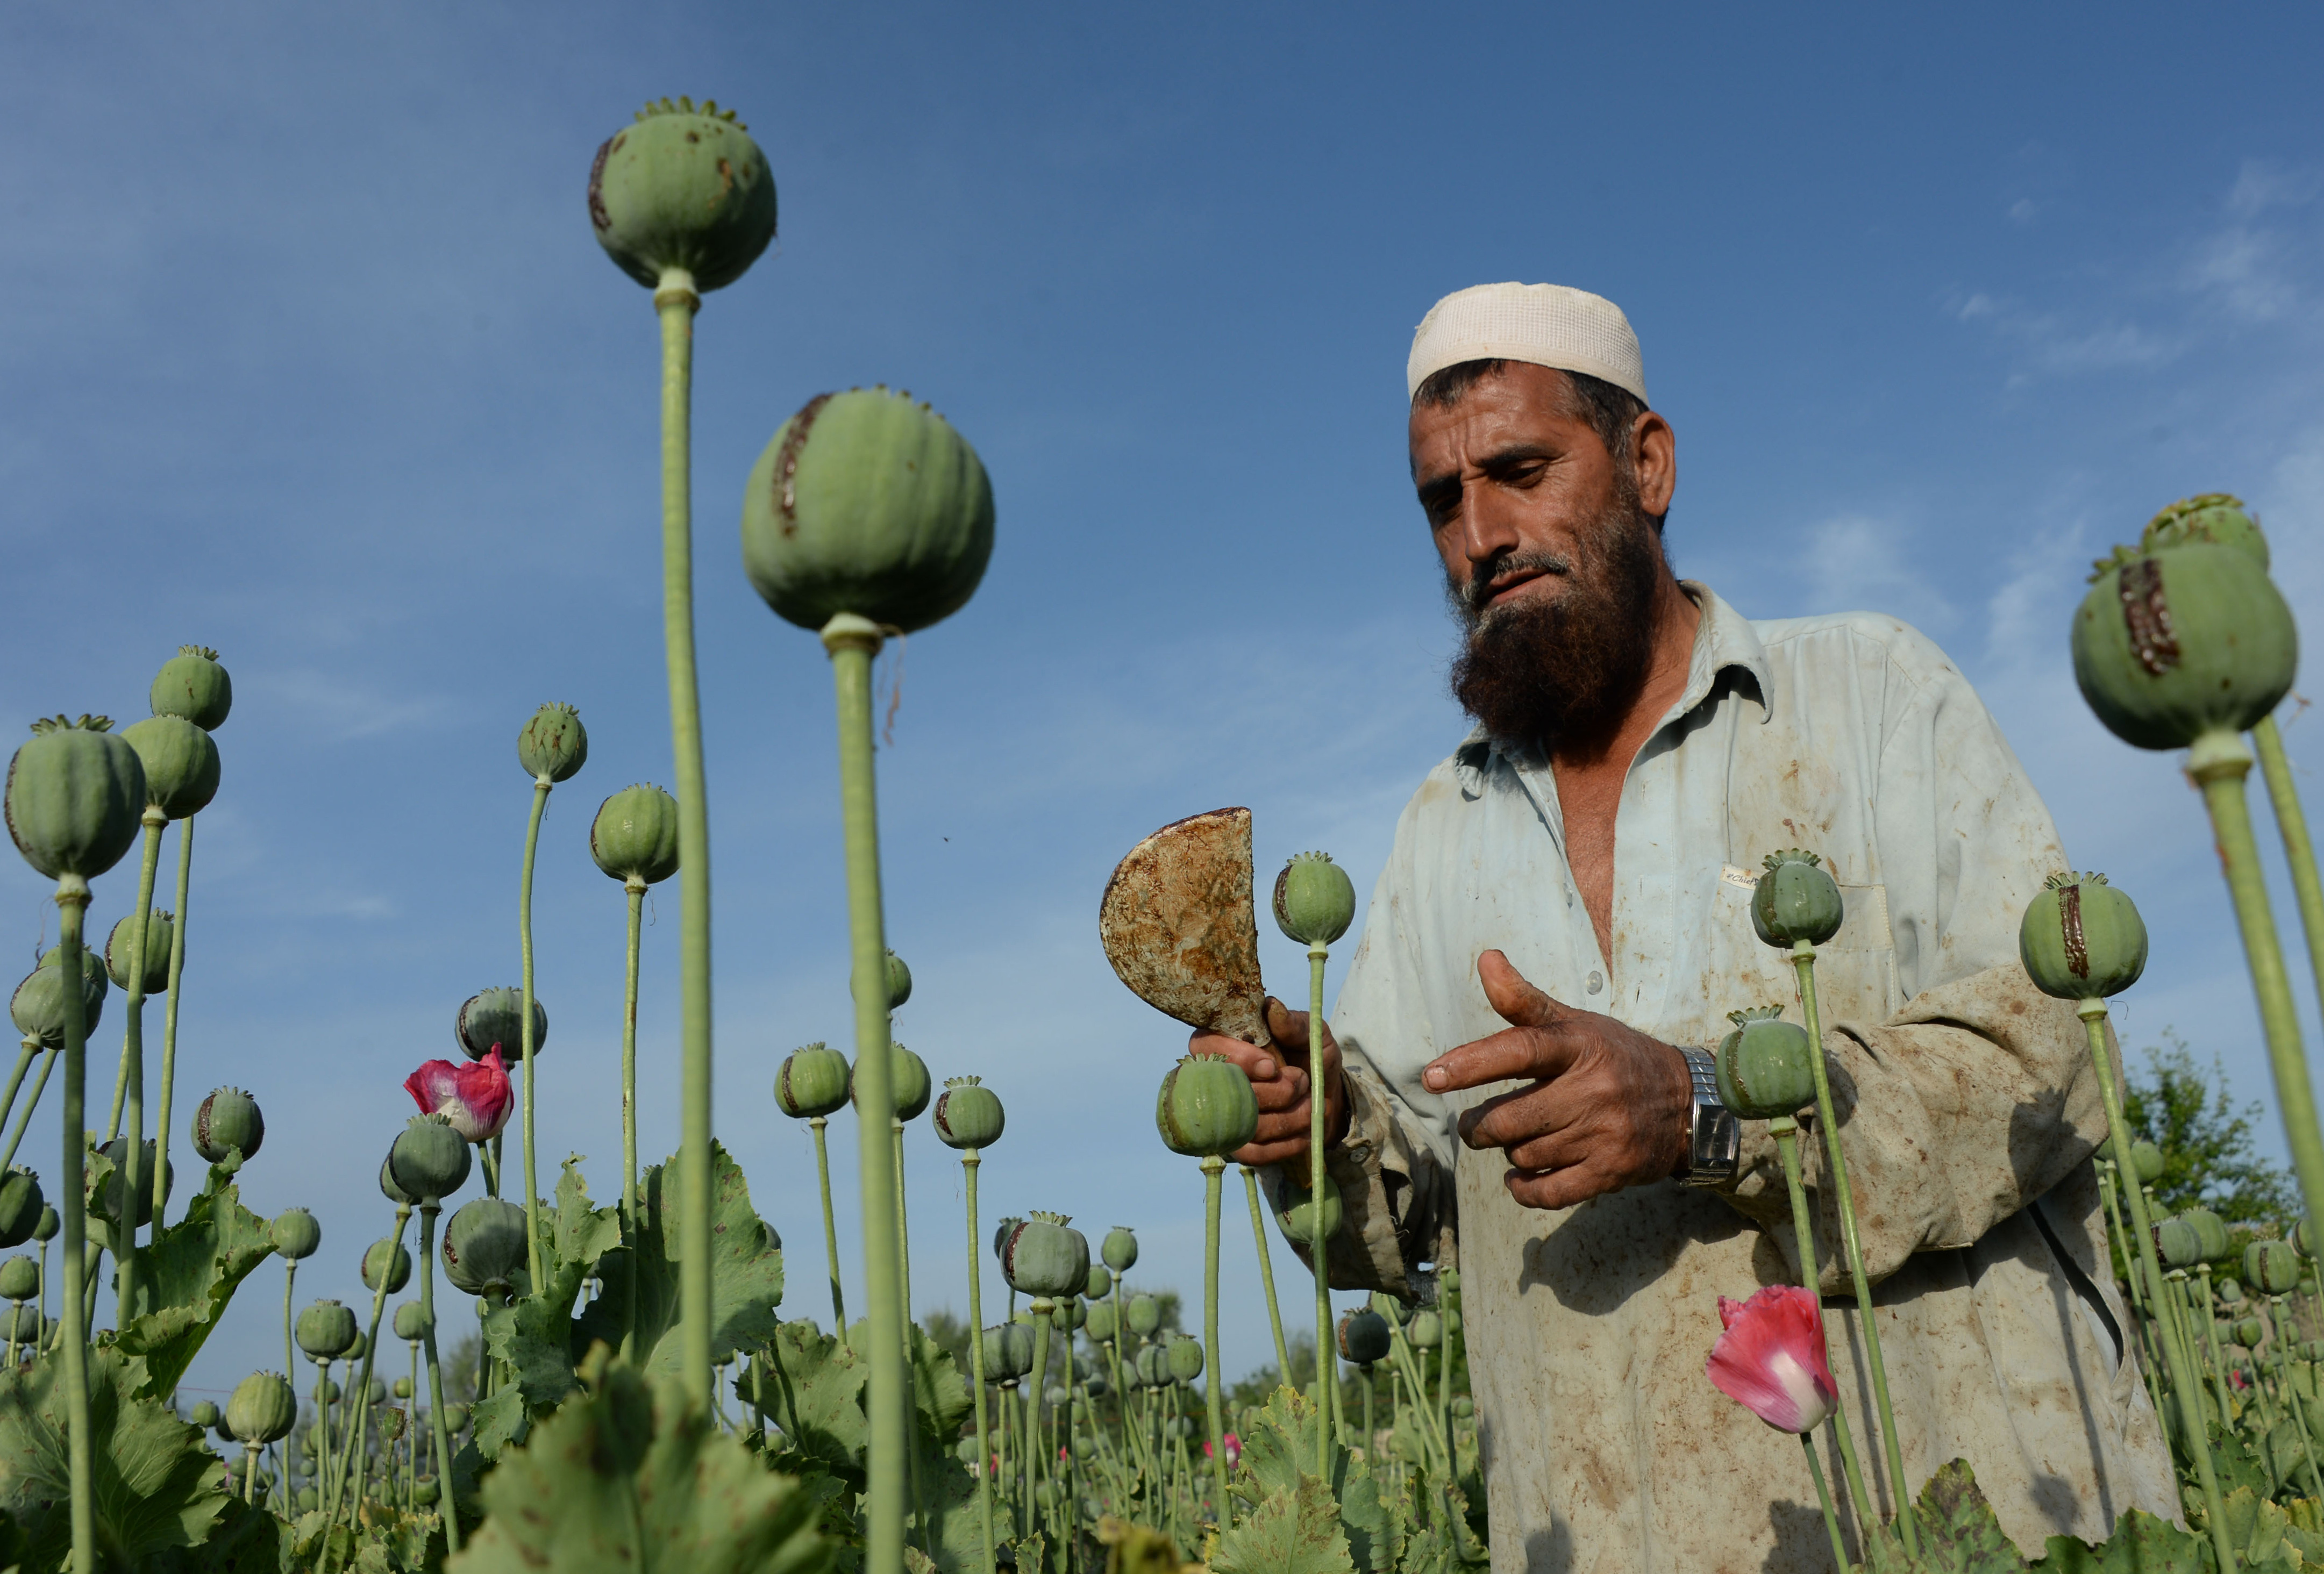 An Afghan farmer harvests opium sap from a poppy field in the Chaparhar district of Nangarhar province on April 19, 2016. (Noorullah Shirzada—AFP/Getty Images)